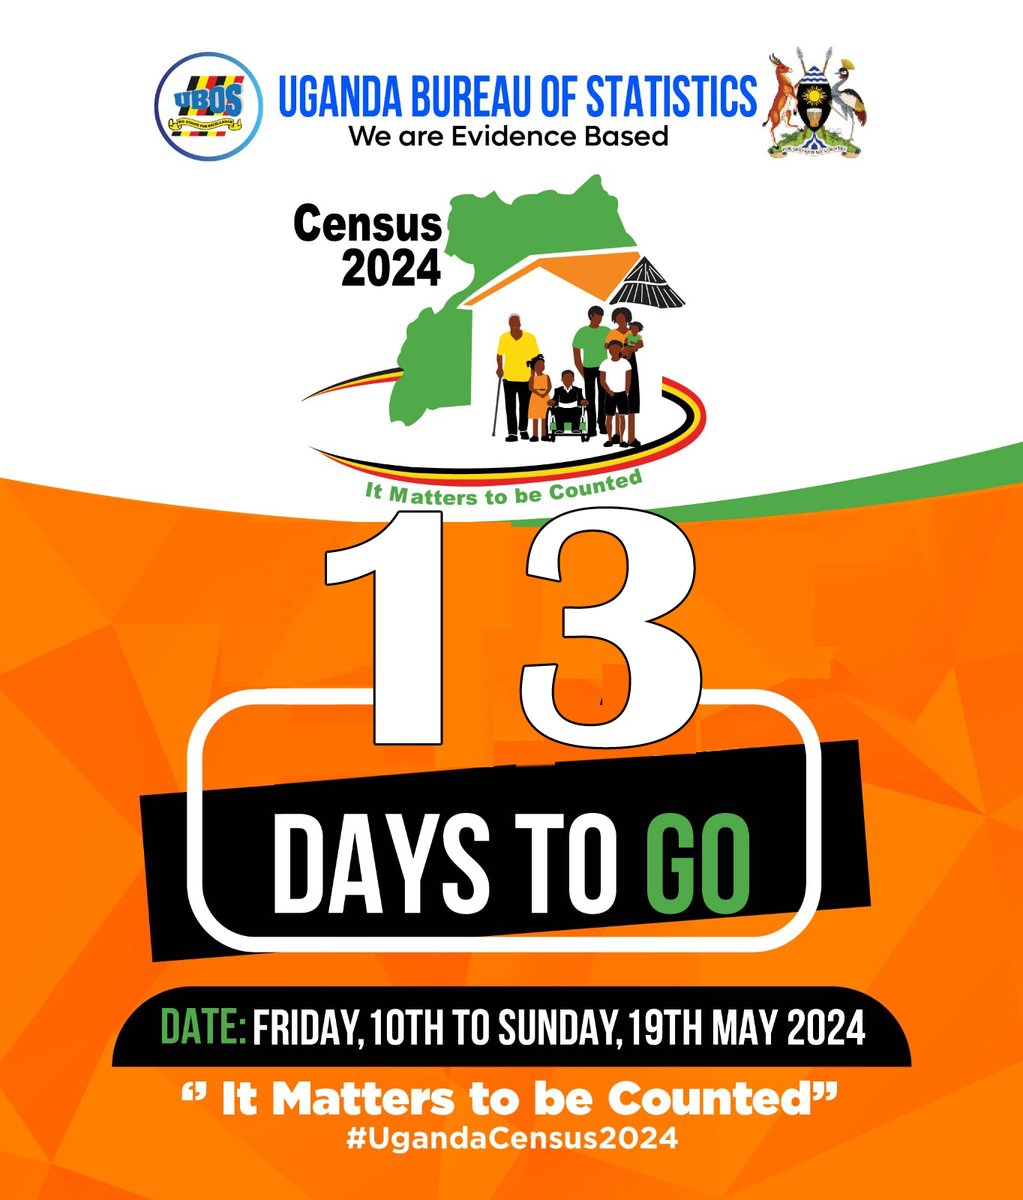 Uganda, we are excited to hear about your expectations for the upcoming #UgandaCensus2024! Let's count down together to the final 1⃣3⃣ days. Share with us your thoughts and hopes for this important activity. #UGCensusCountdown